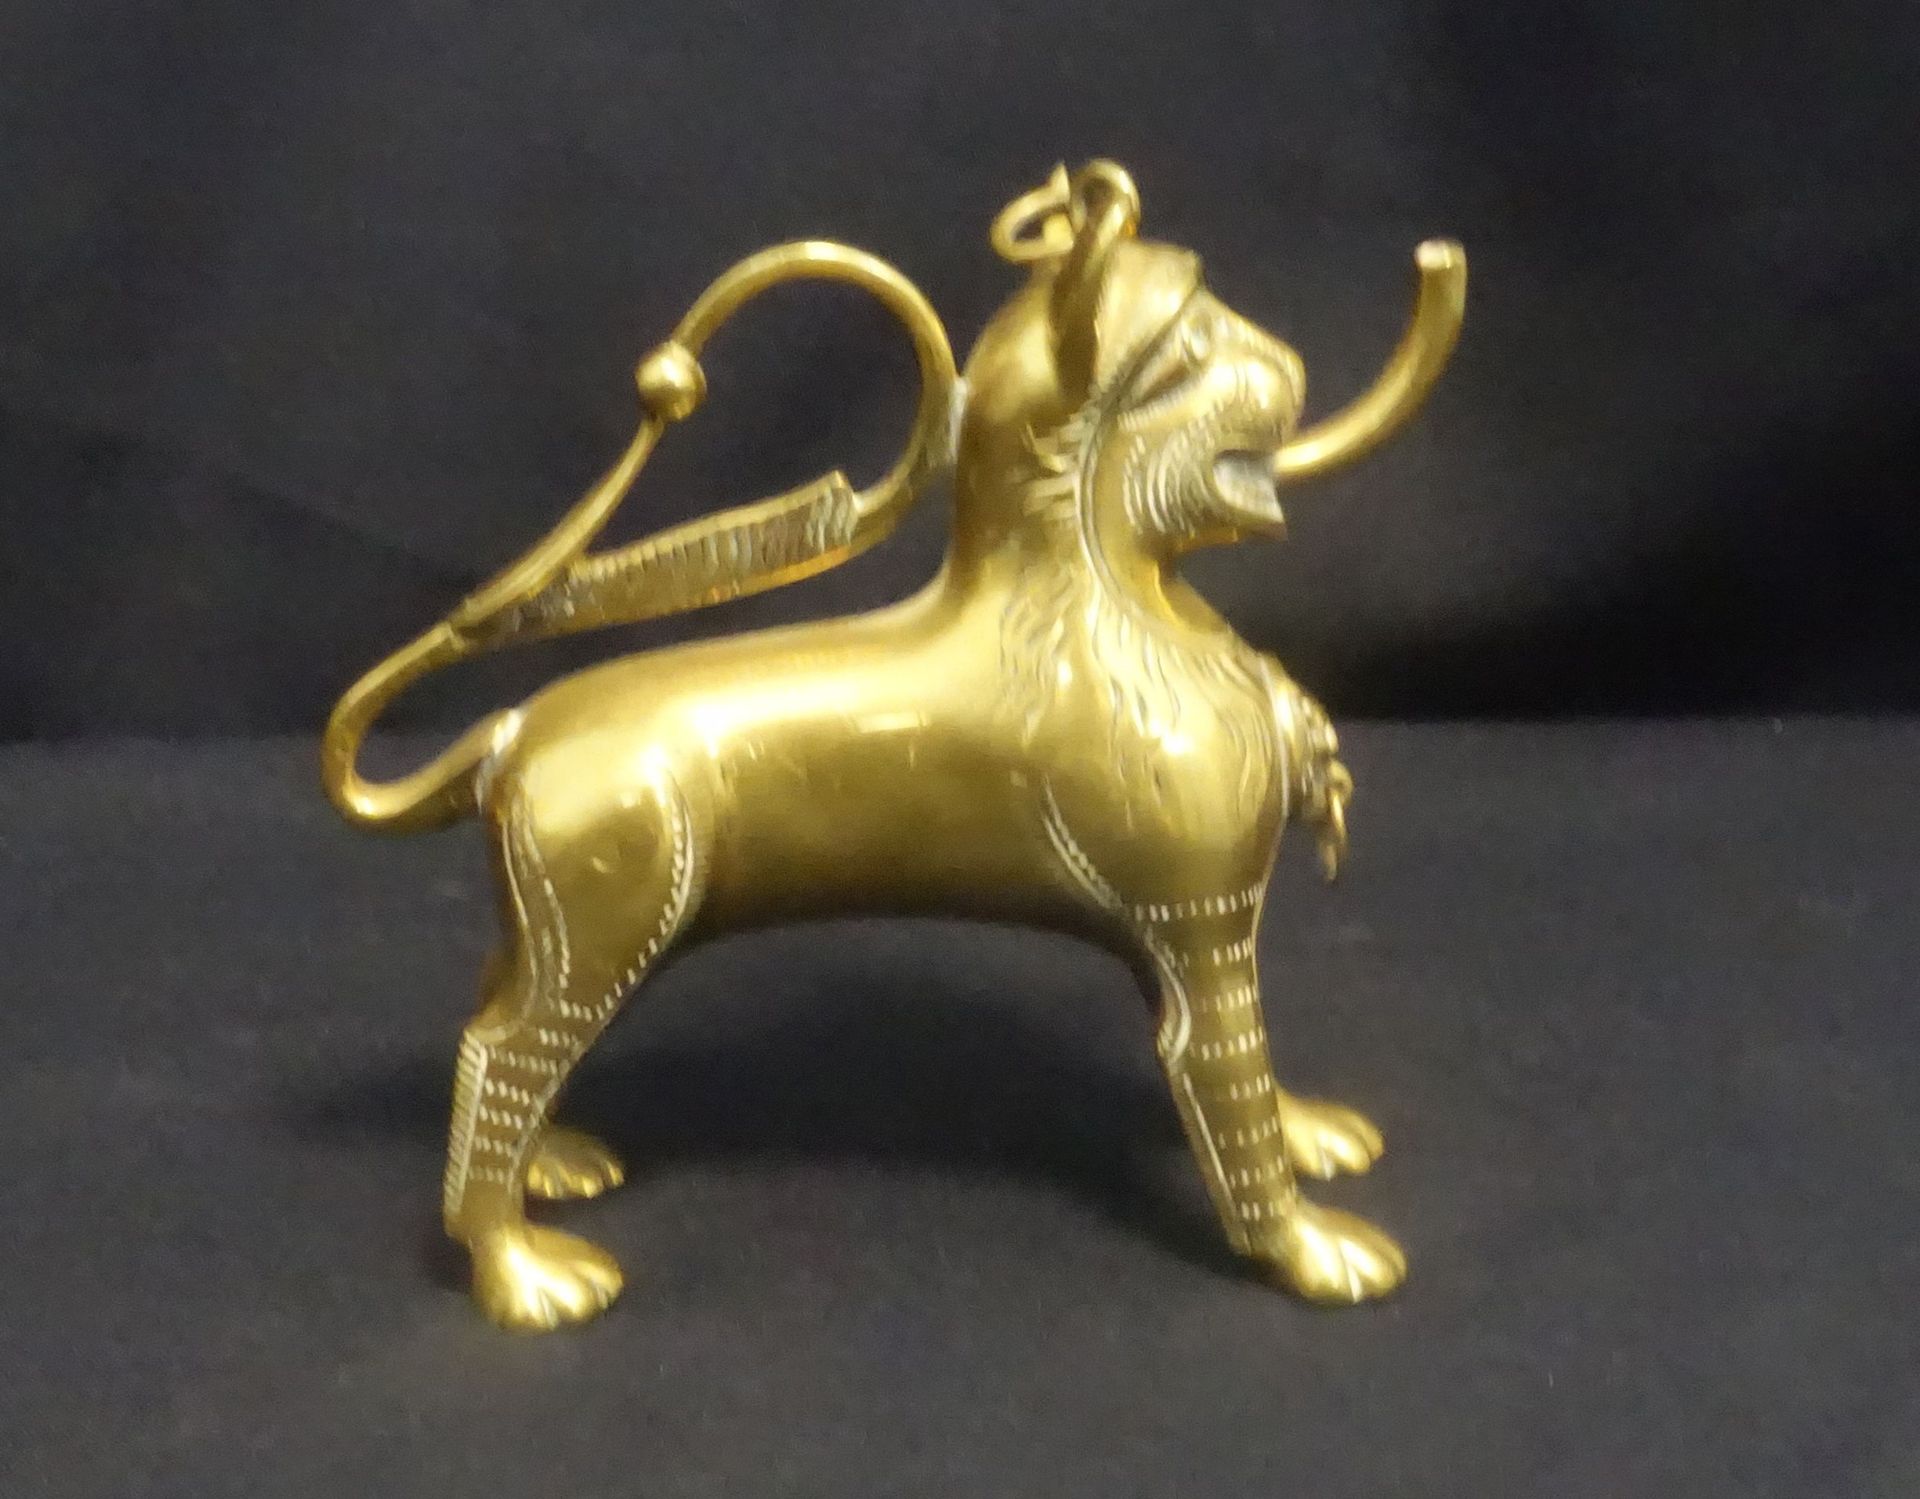 OIL LAMP "LION" - Image 3 of 3